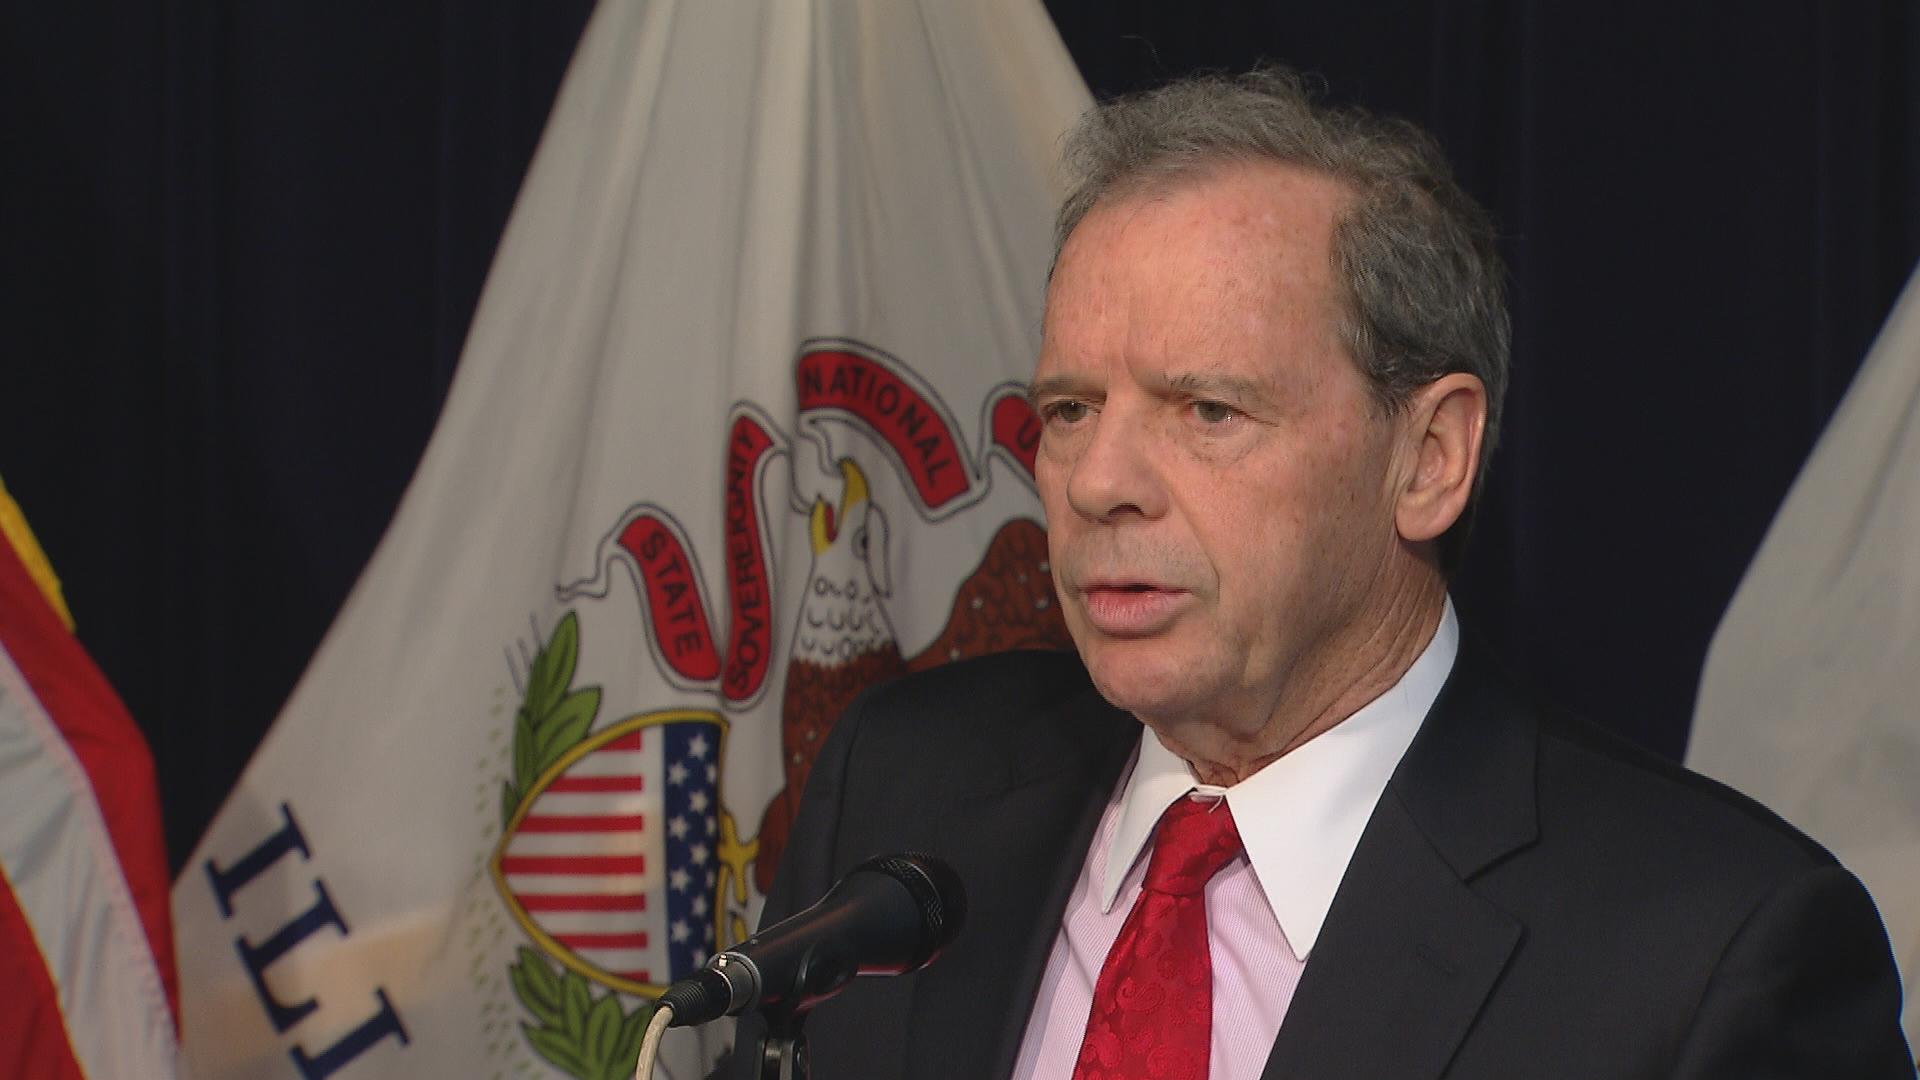 “I want to work with this governor, but that requires him to start working and stop campaigning,” said Senate President John Cullerton on Wednesday. “It's time for him to put down the keys to the campaign bus and join us in honest negotiation.”